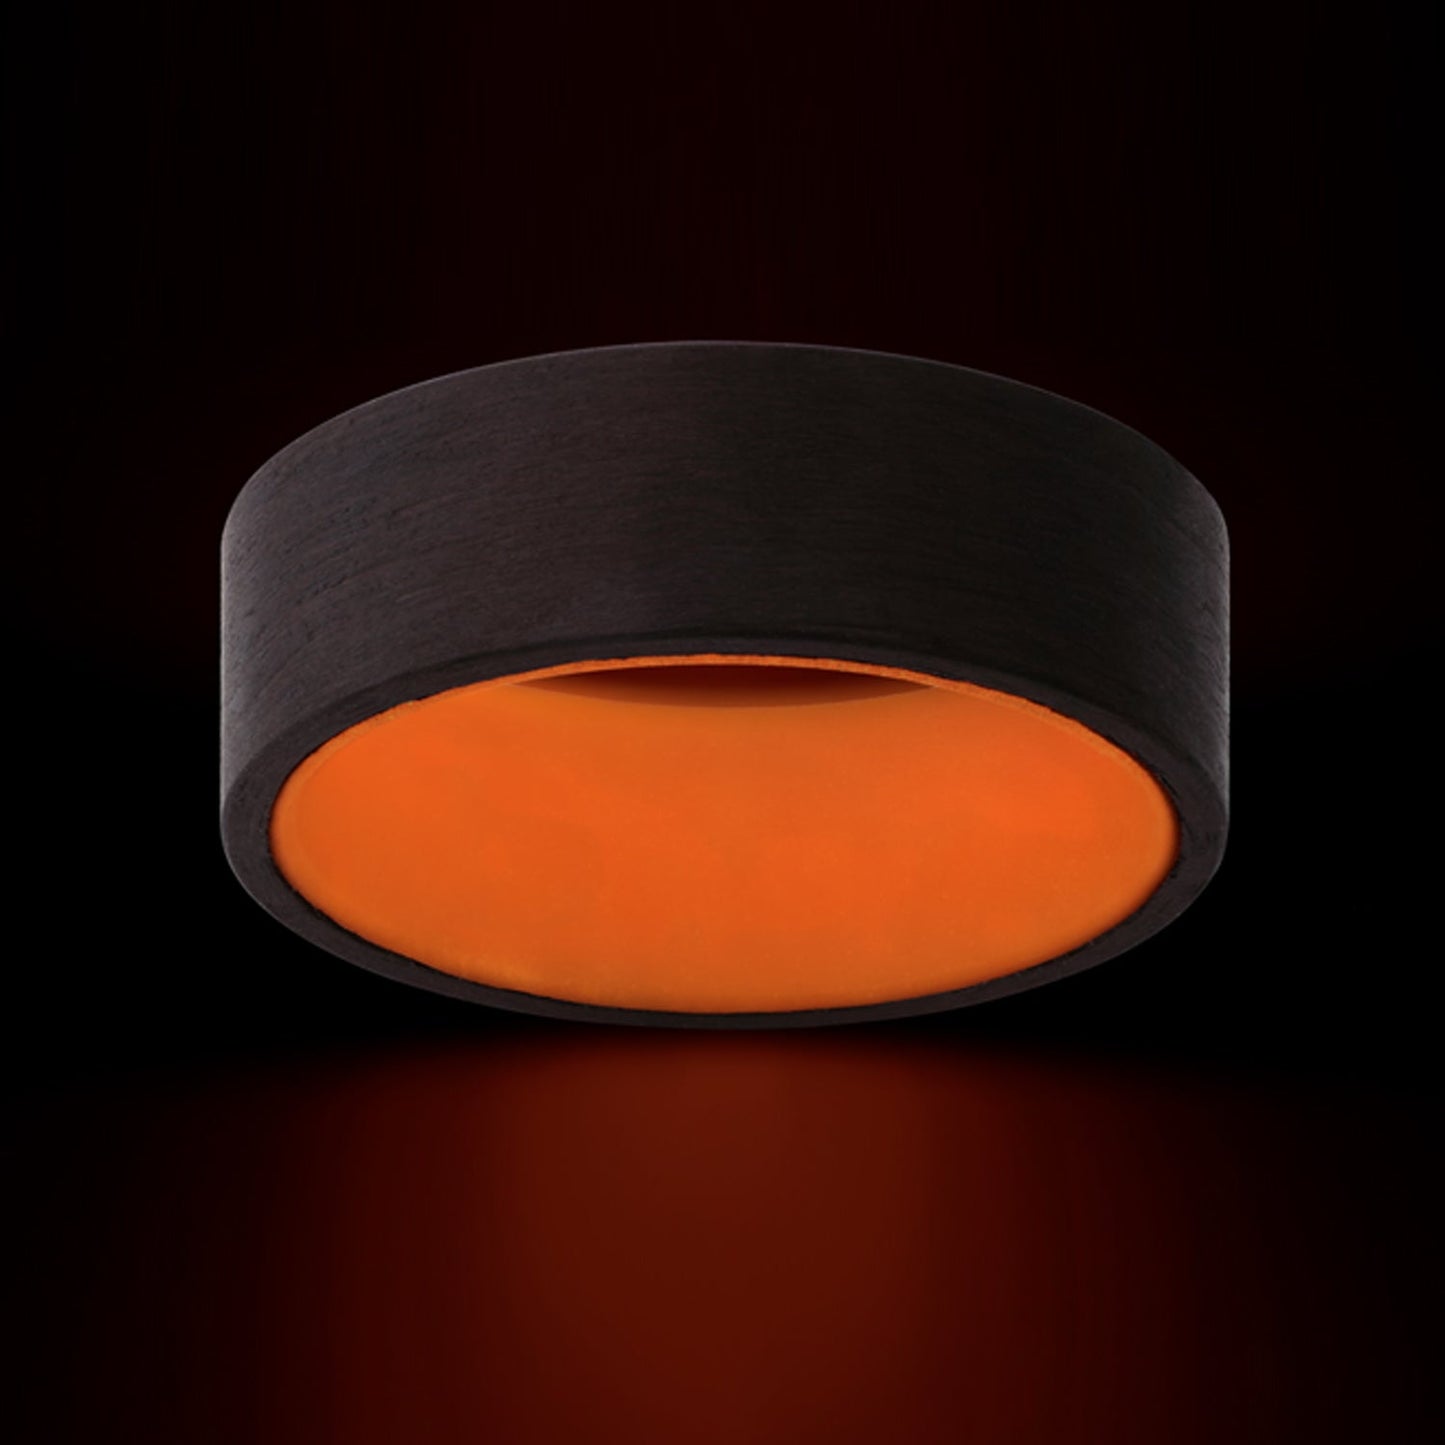 Glow in the Dark Carbon Fiber Wedding Band with Contrasting Orange Center